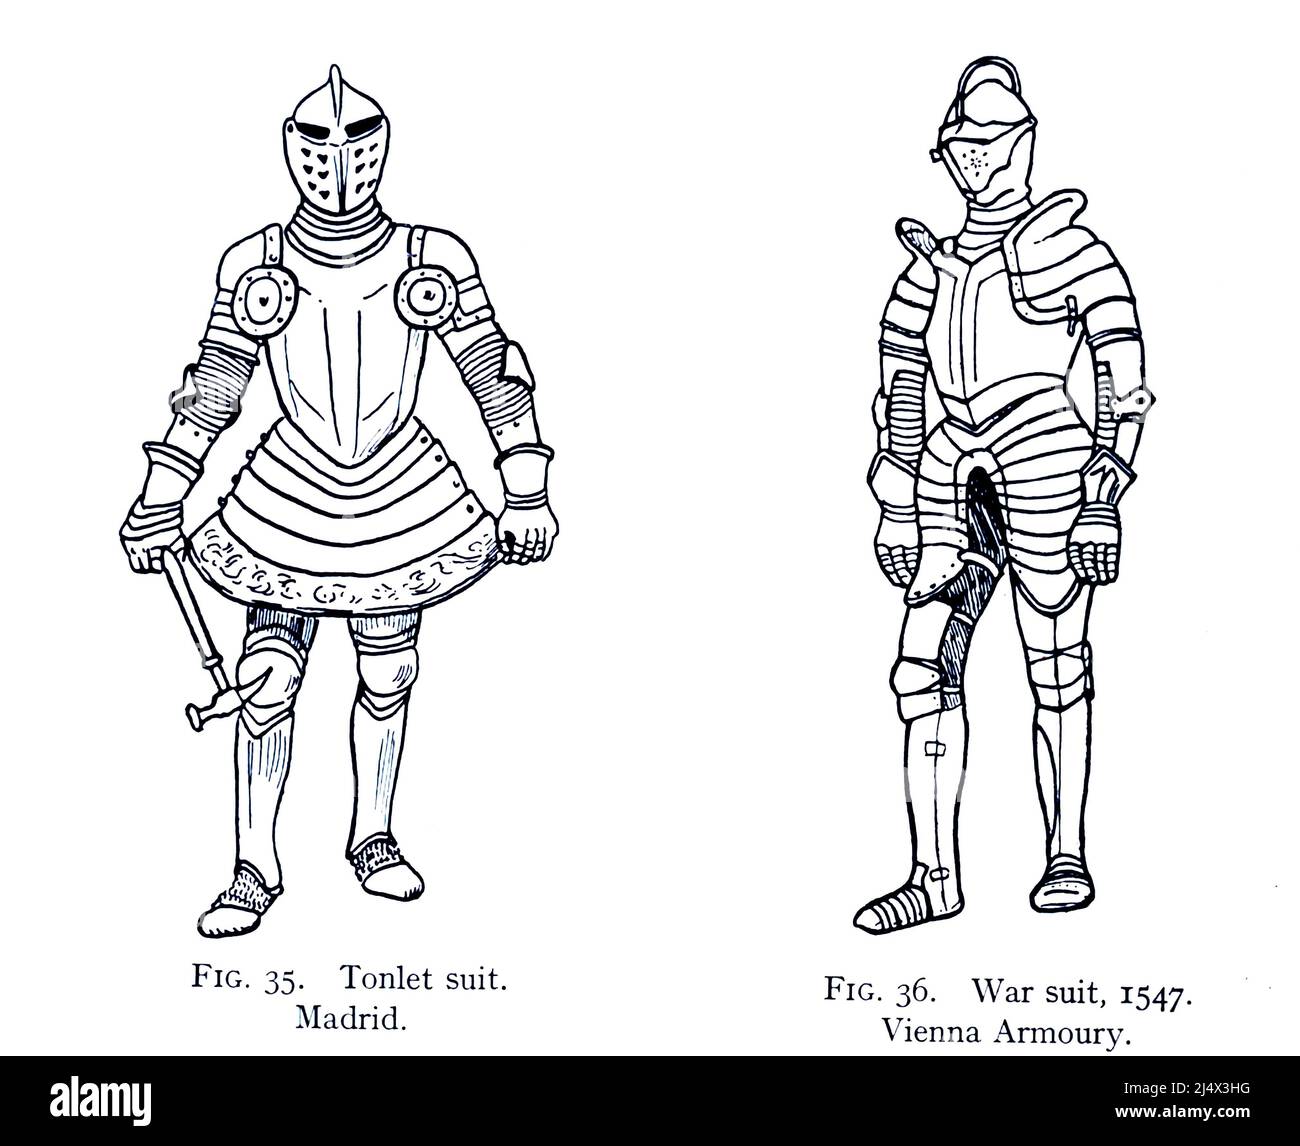 Tonlet suit. Madrid. (Left) War suit, 1547. Vienna Armoury (Right) from the book ' Armour & weapons ' by Charles John Ffoulkes,  Publisher Oxford Clarendon press 1909 Stock Photo